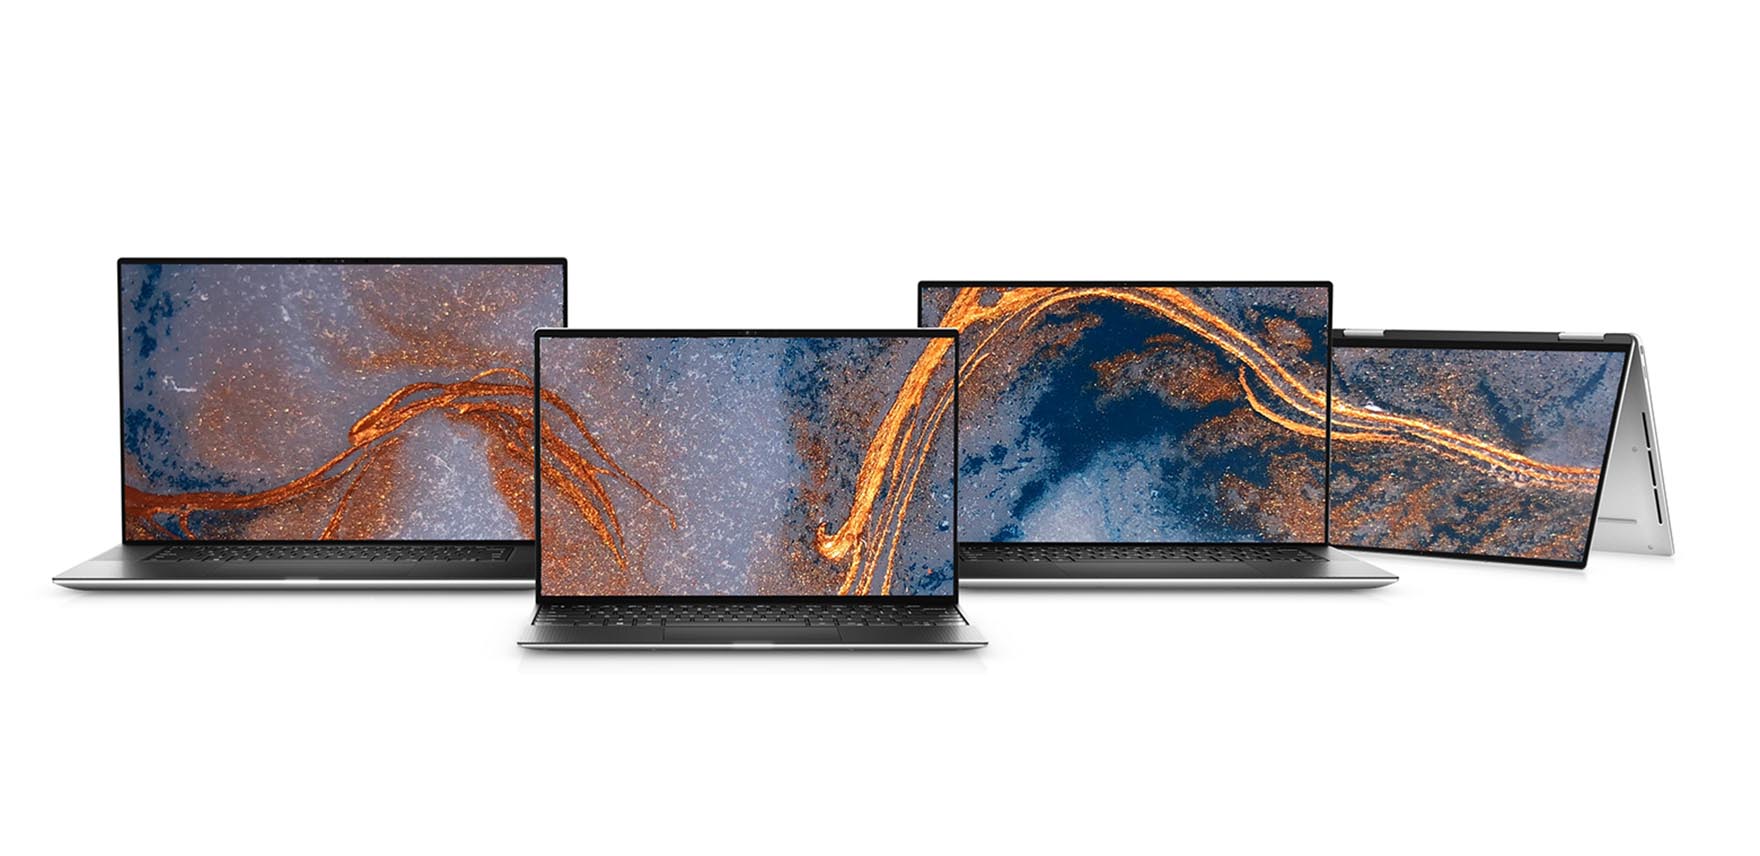 Four Dell XPS laptops open in different positions